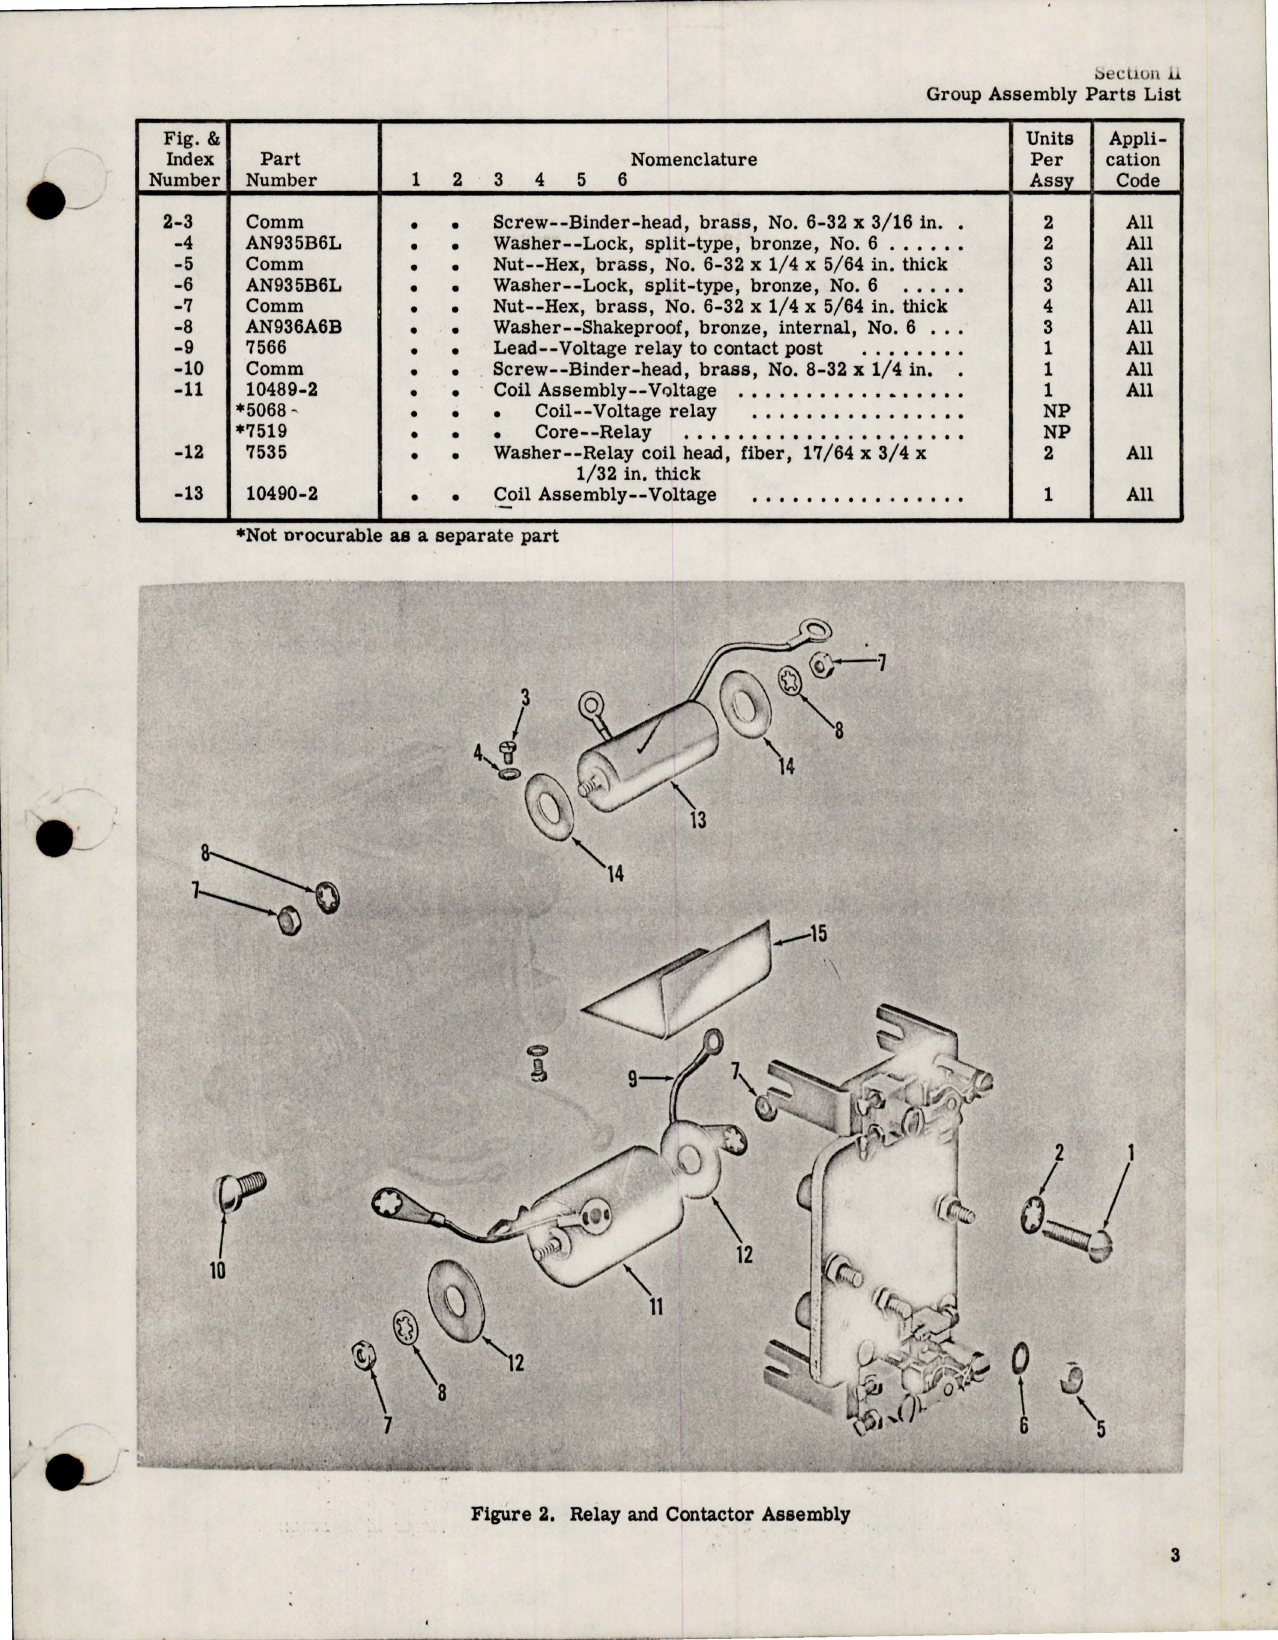 Sample page 5 from AirCorps Library document: Illustrated Parts Breakdown for Reverse Current Cutout - Parts A-700, A-700A and A-718 